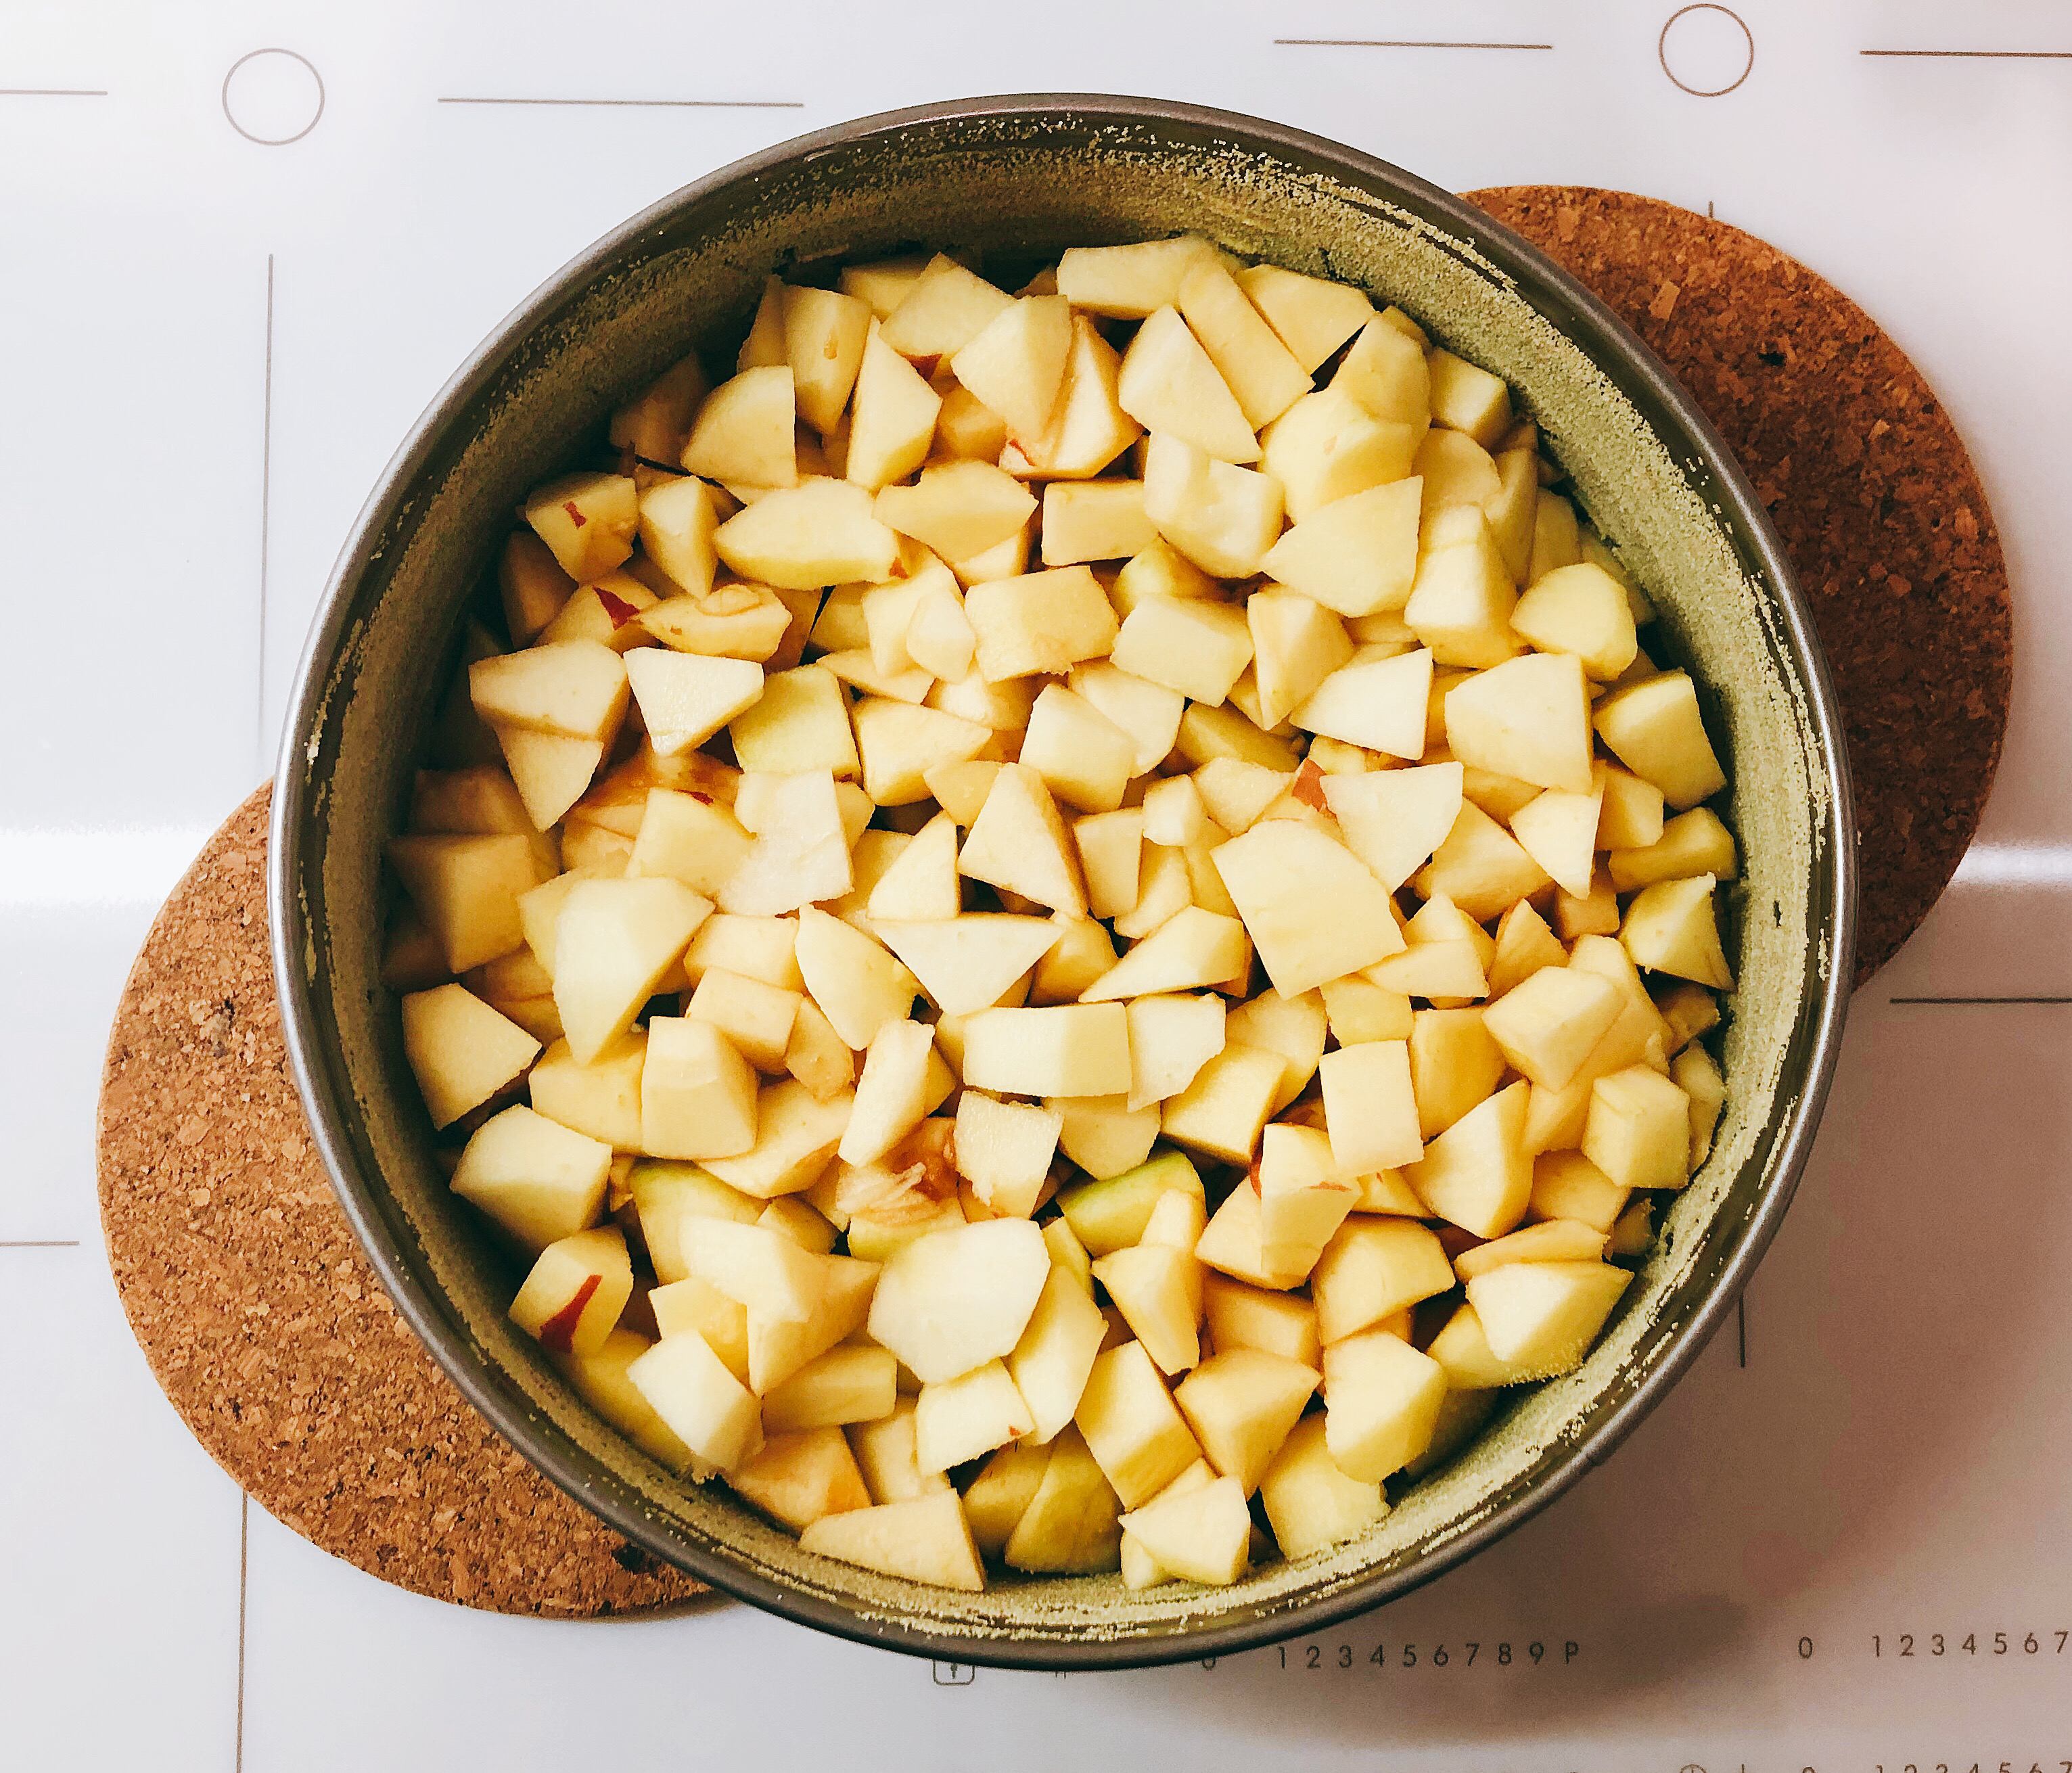 Apple slices in the baking dish